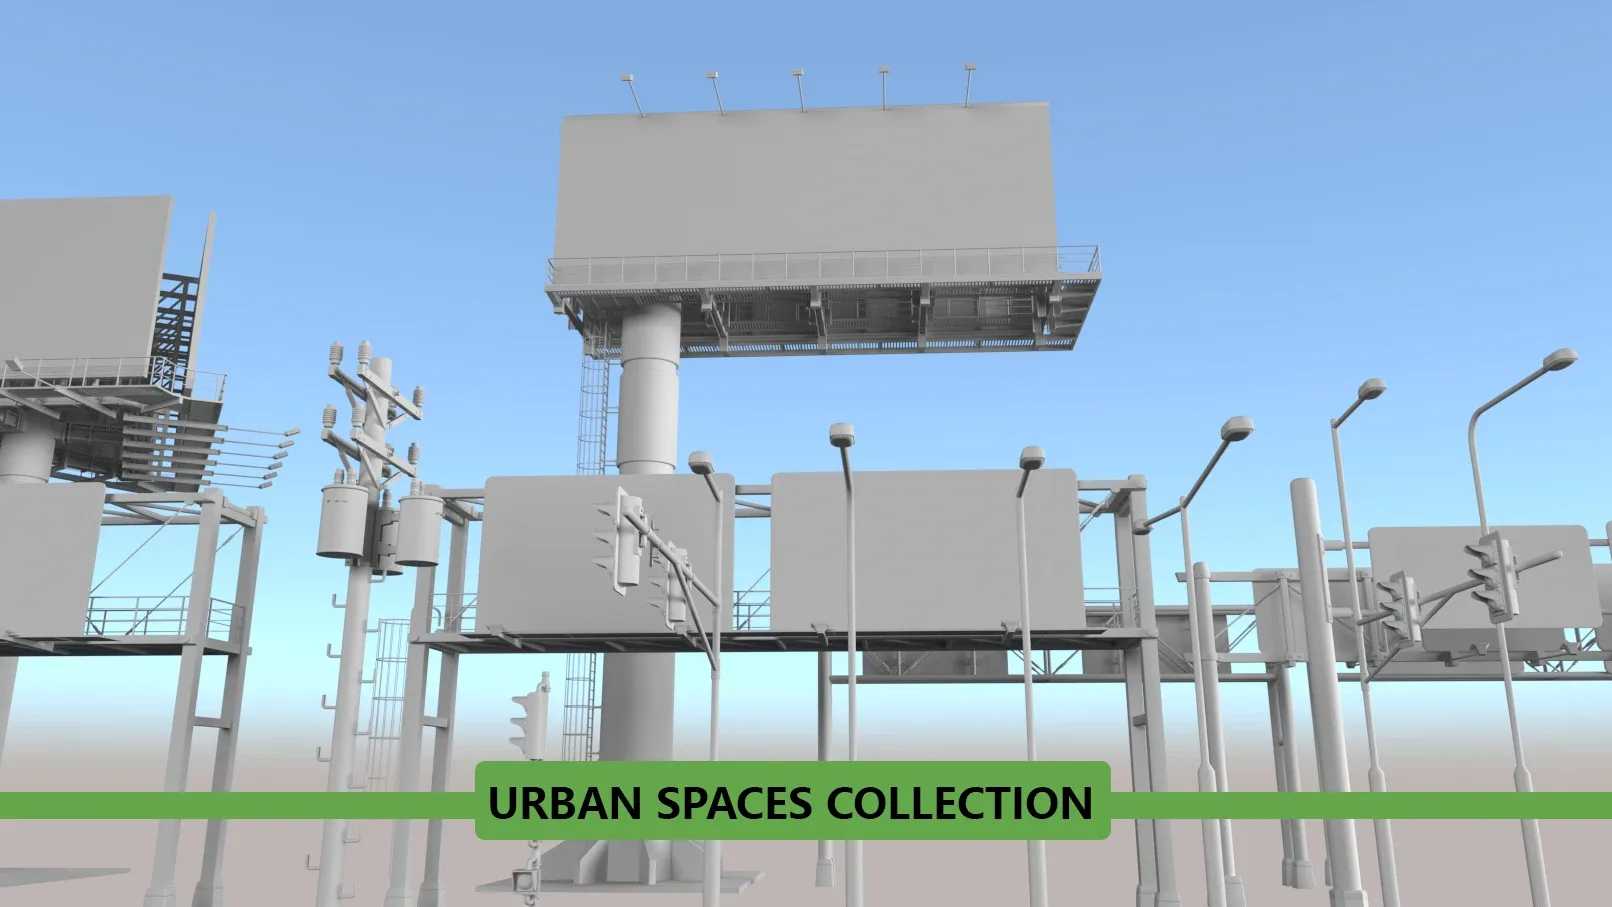 URBAN SPACES COLLECTION